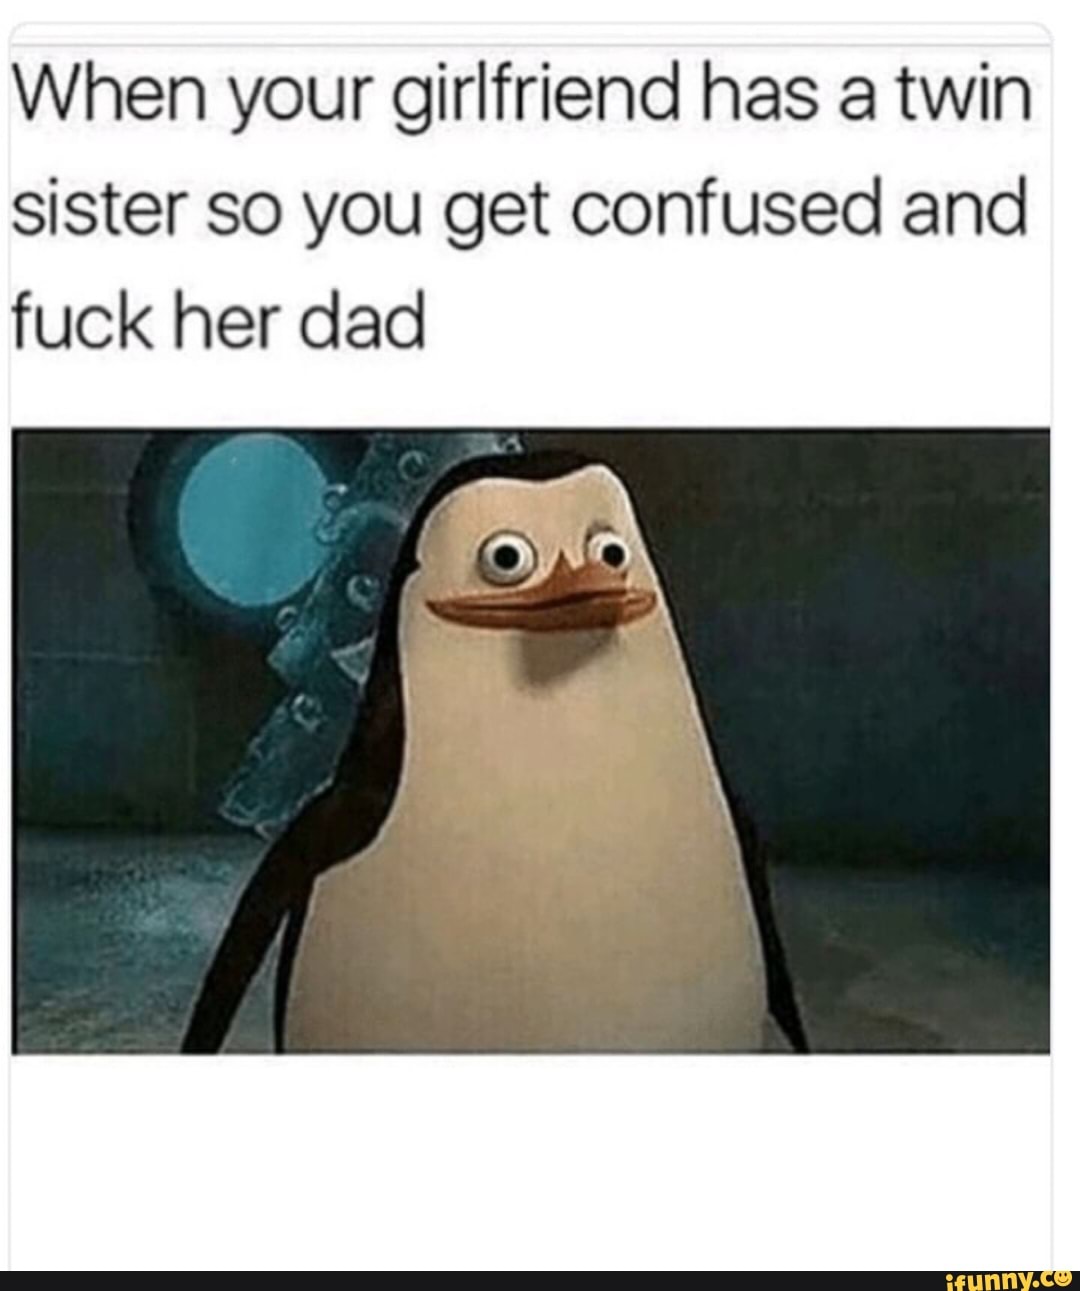 When your girlfriend has a twin sister so you get confused and fuck her dad  pic